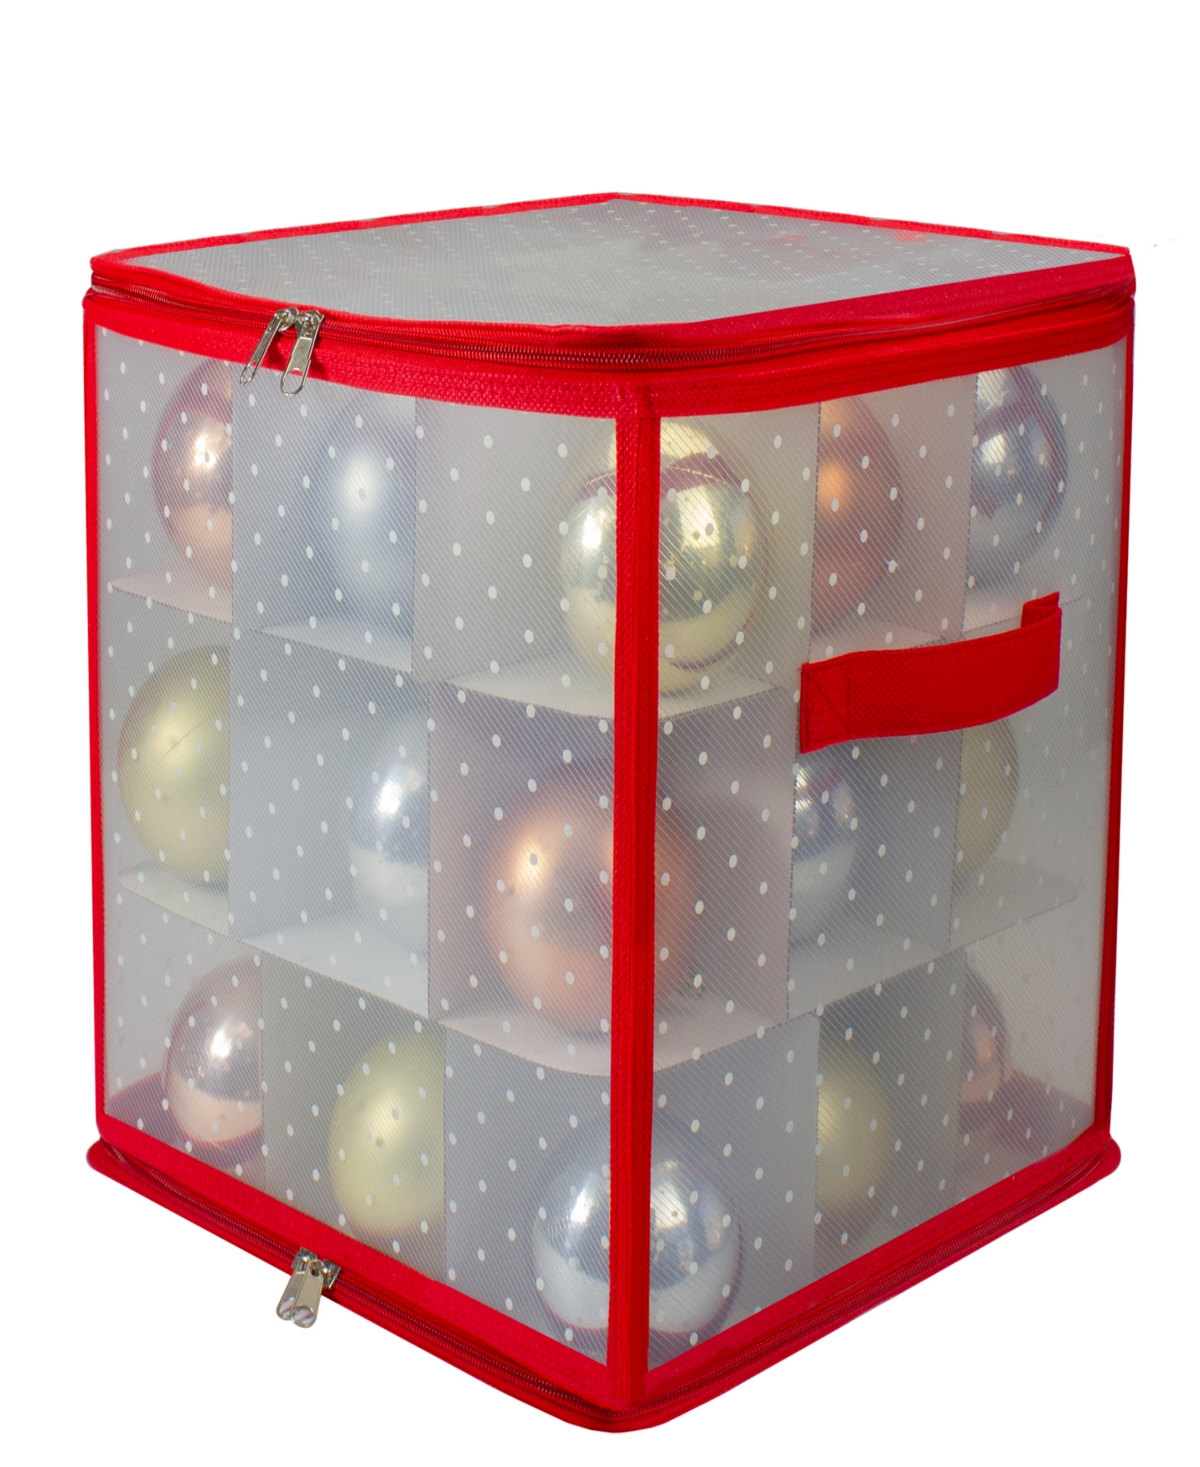 Northlight 12" Transparent Zip Up Christmas Storage Box, Holds 27 Ornaments In Clear